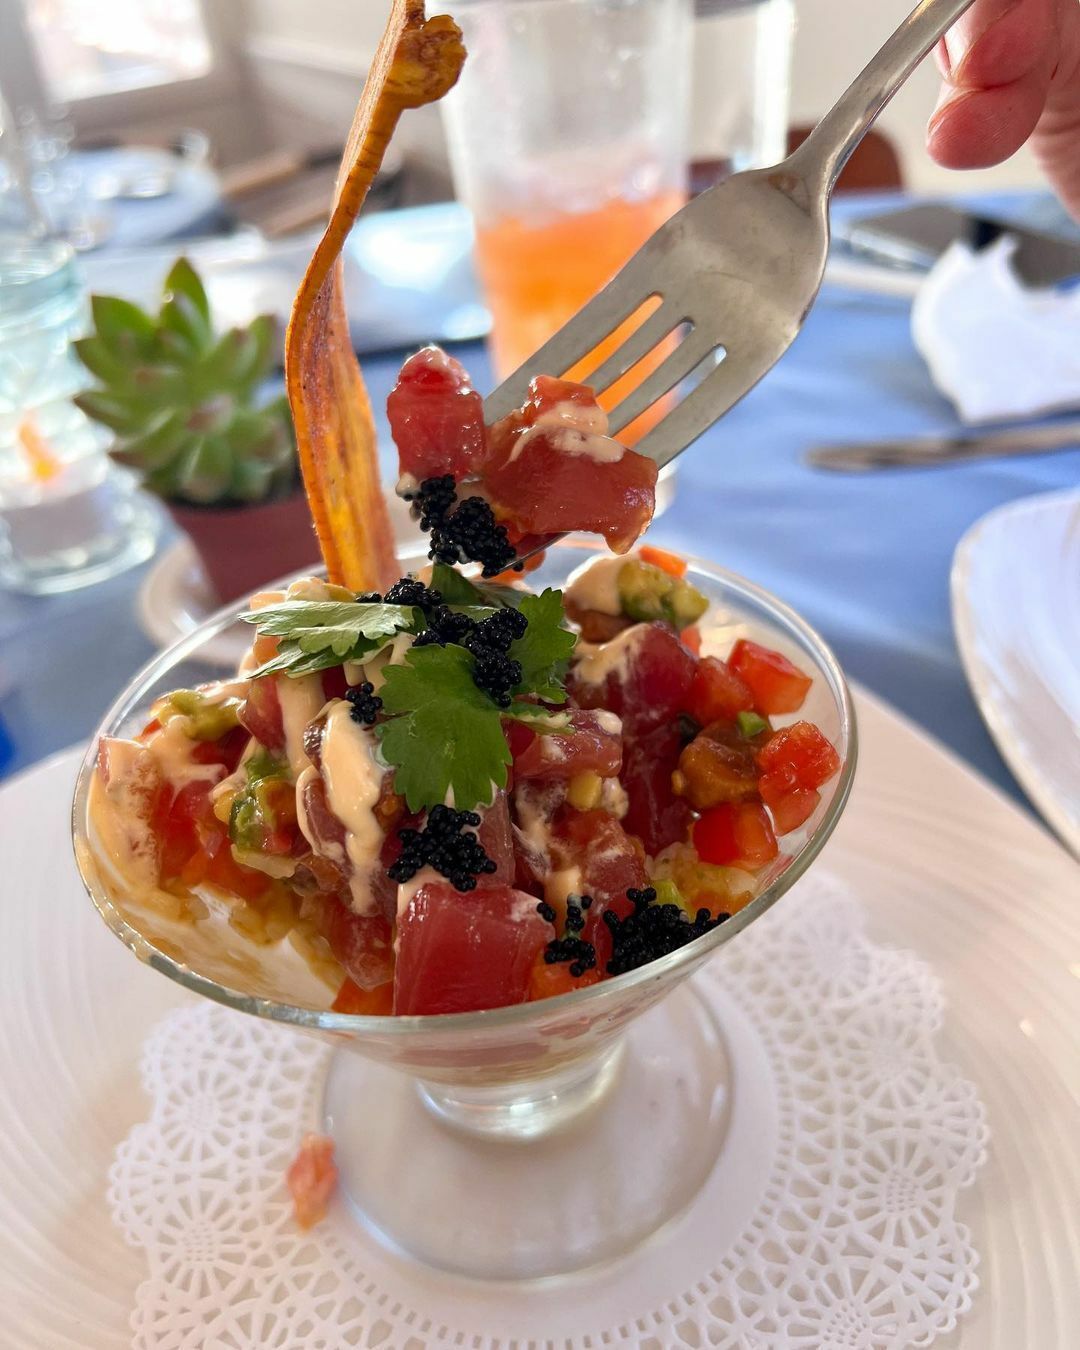 Ceviche is on the menu at Bostwick's on the Harbor. COURTESY BOSTWICKS ON THE HARBOR